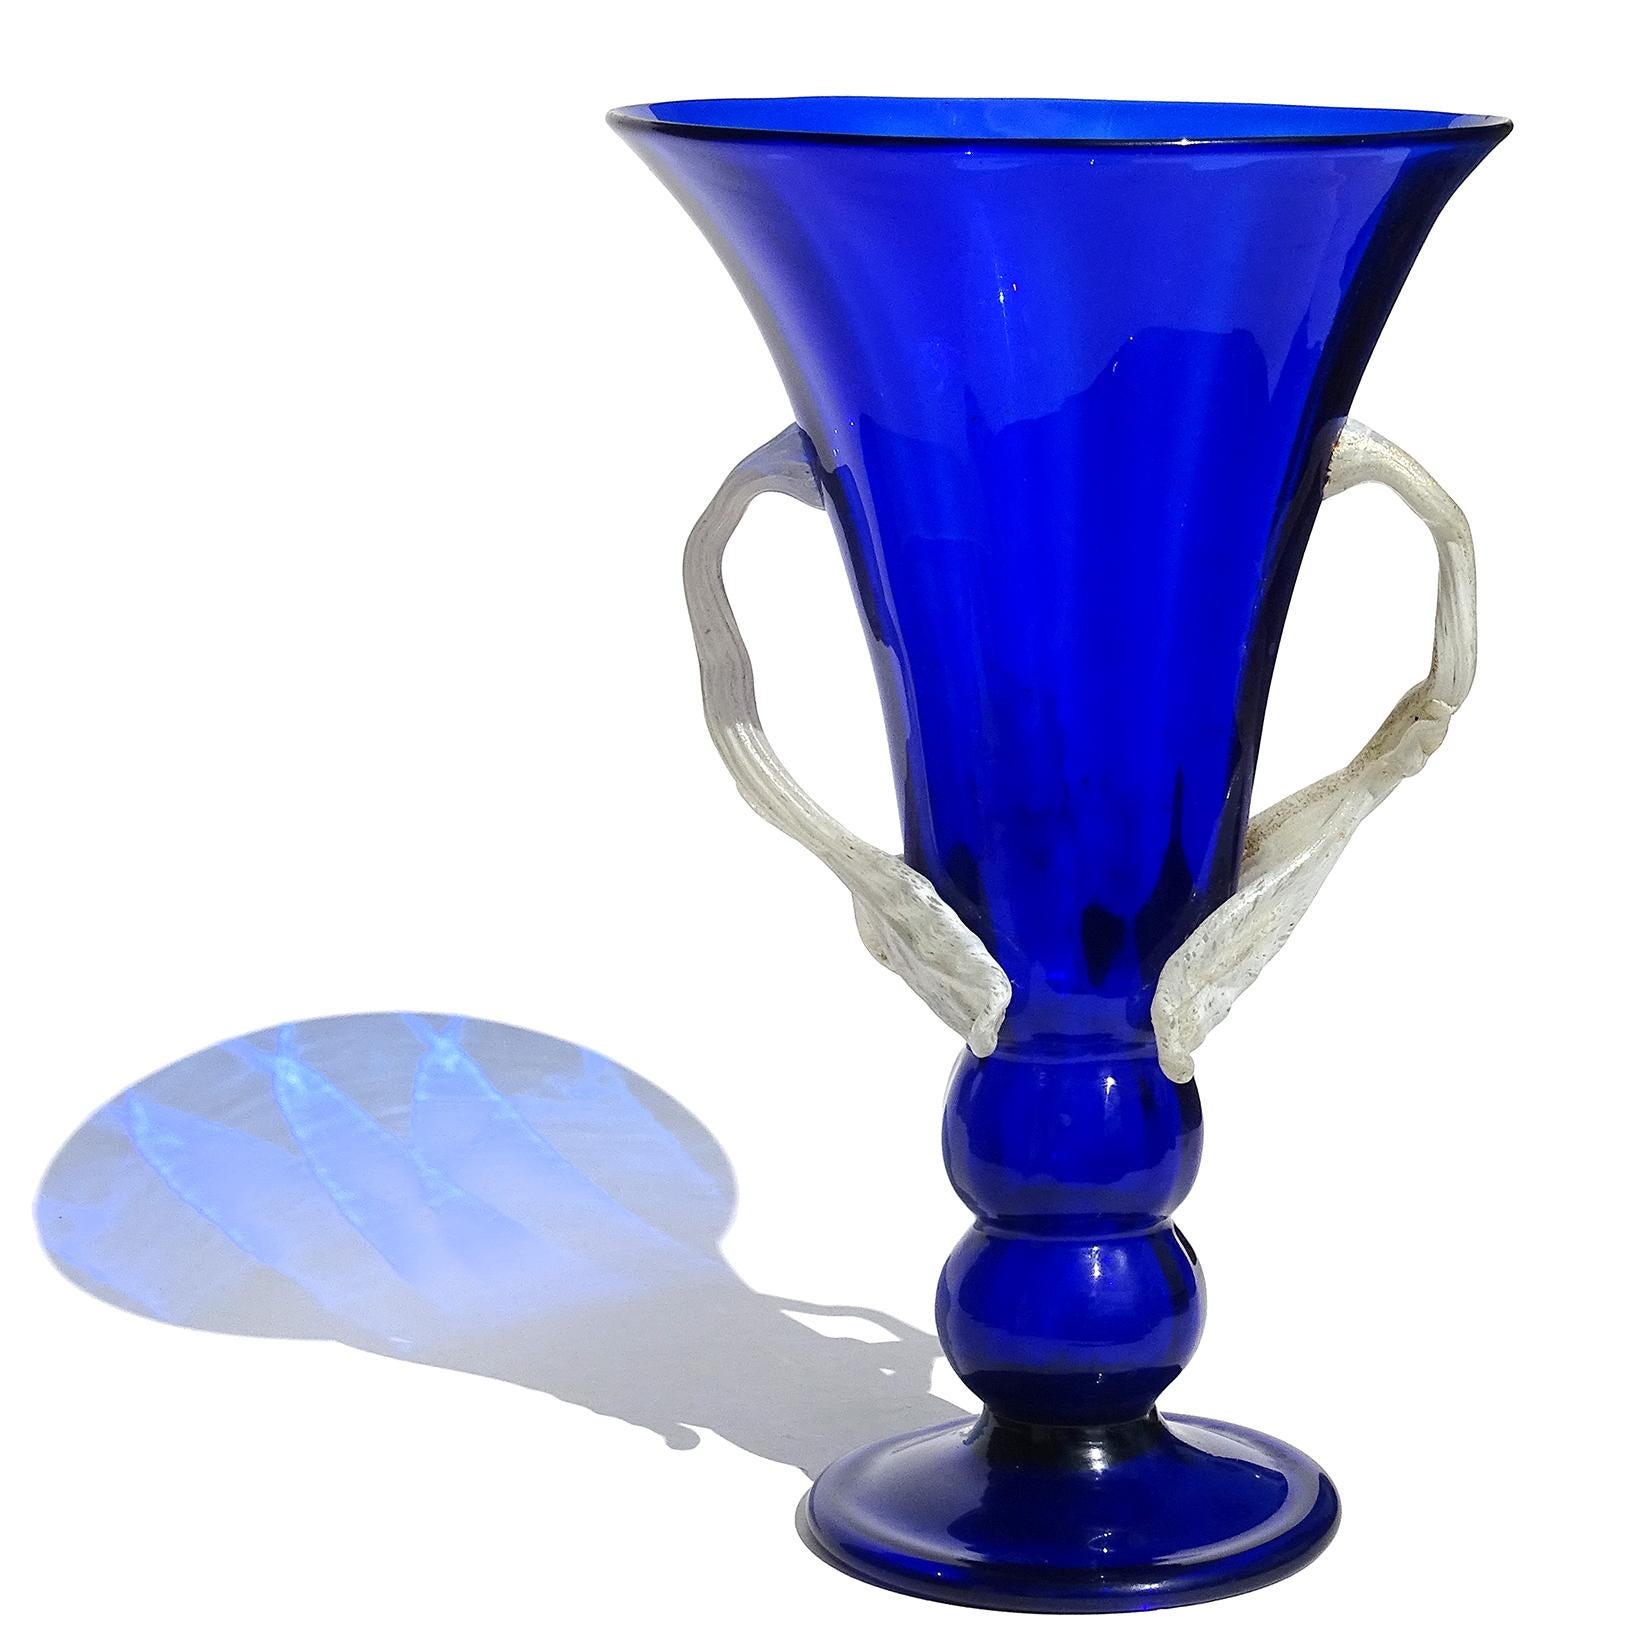 Beautiful antique Murano hand blown rich cobalt blue Italian art glass flower vase. Documented to the company Artistica Soffiera Vetreria - Barovier Seguso Ferro. The company was in business for only 4 years (1933-1937), before becoming Seguso Vetri